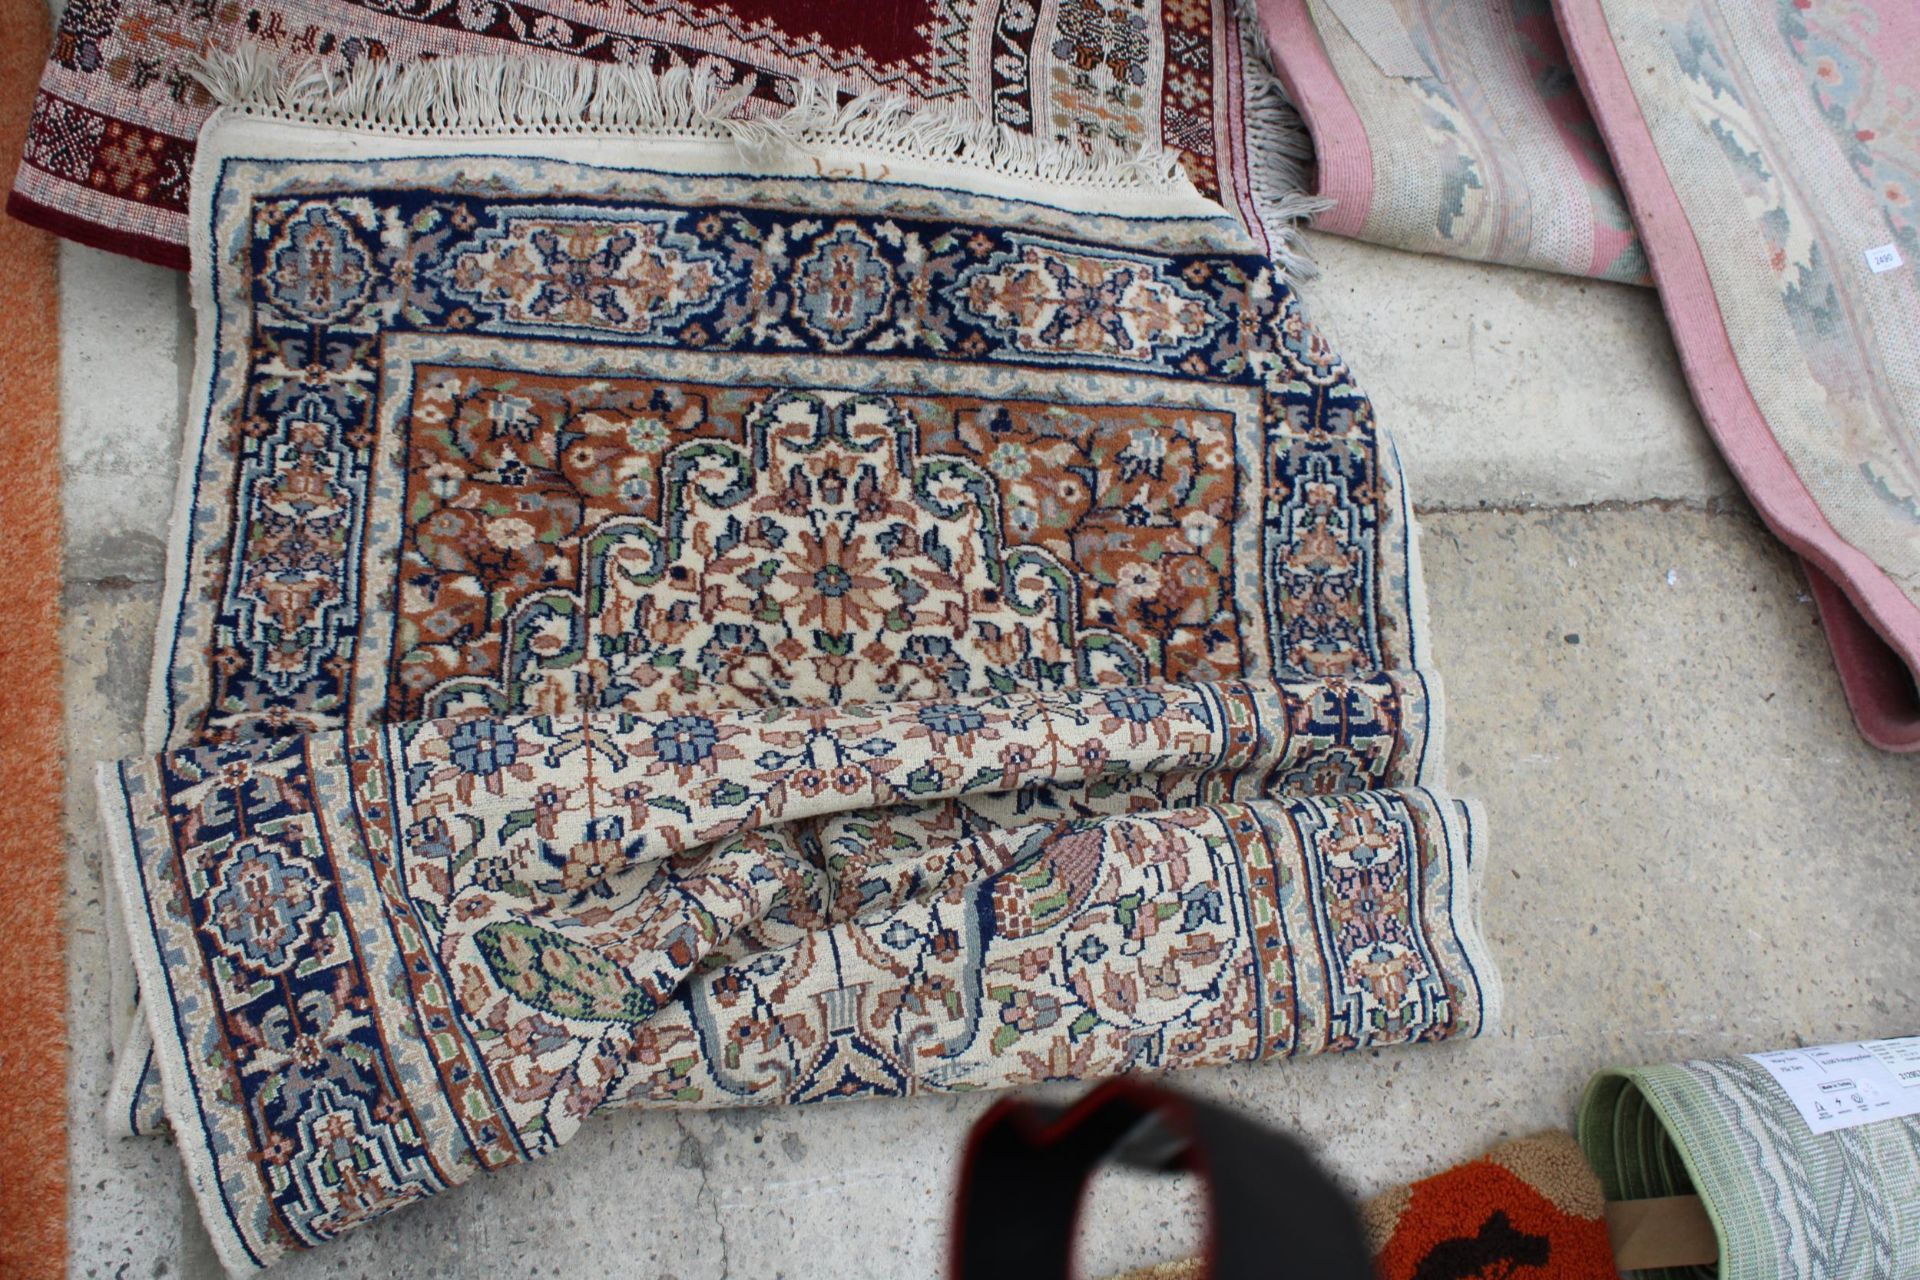 TWO VARIOUS PATTERNED RUGS - Image 2 of 2